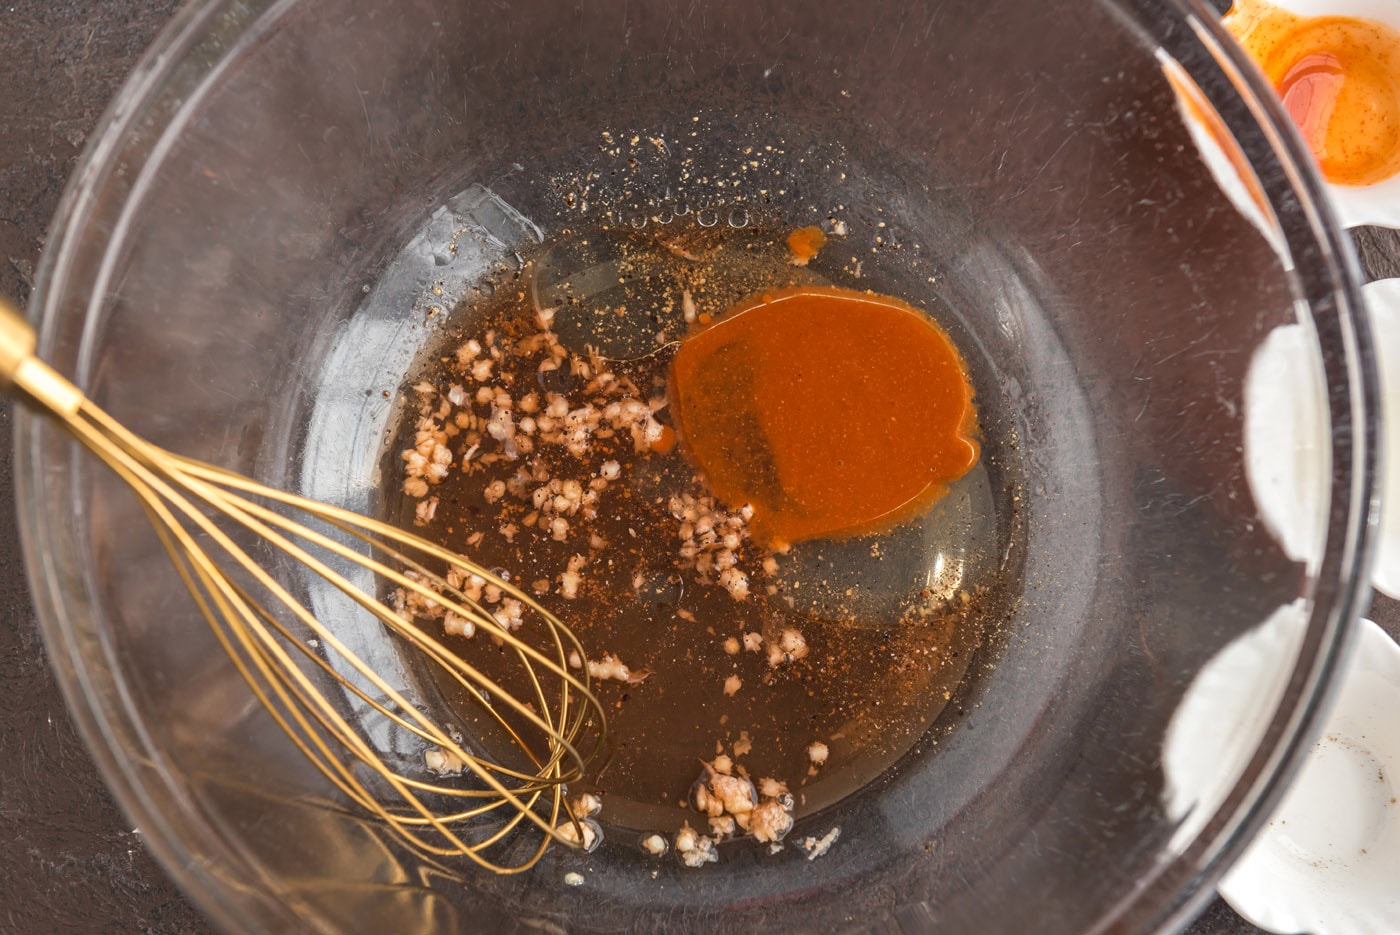 whisking hot sauce, oil, vinegar, and garlic in a bowl